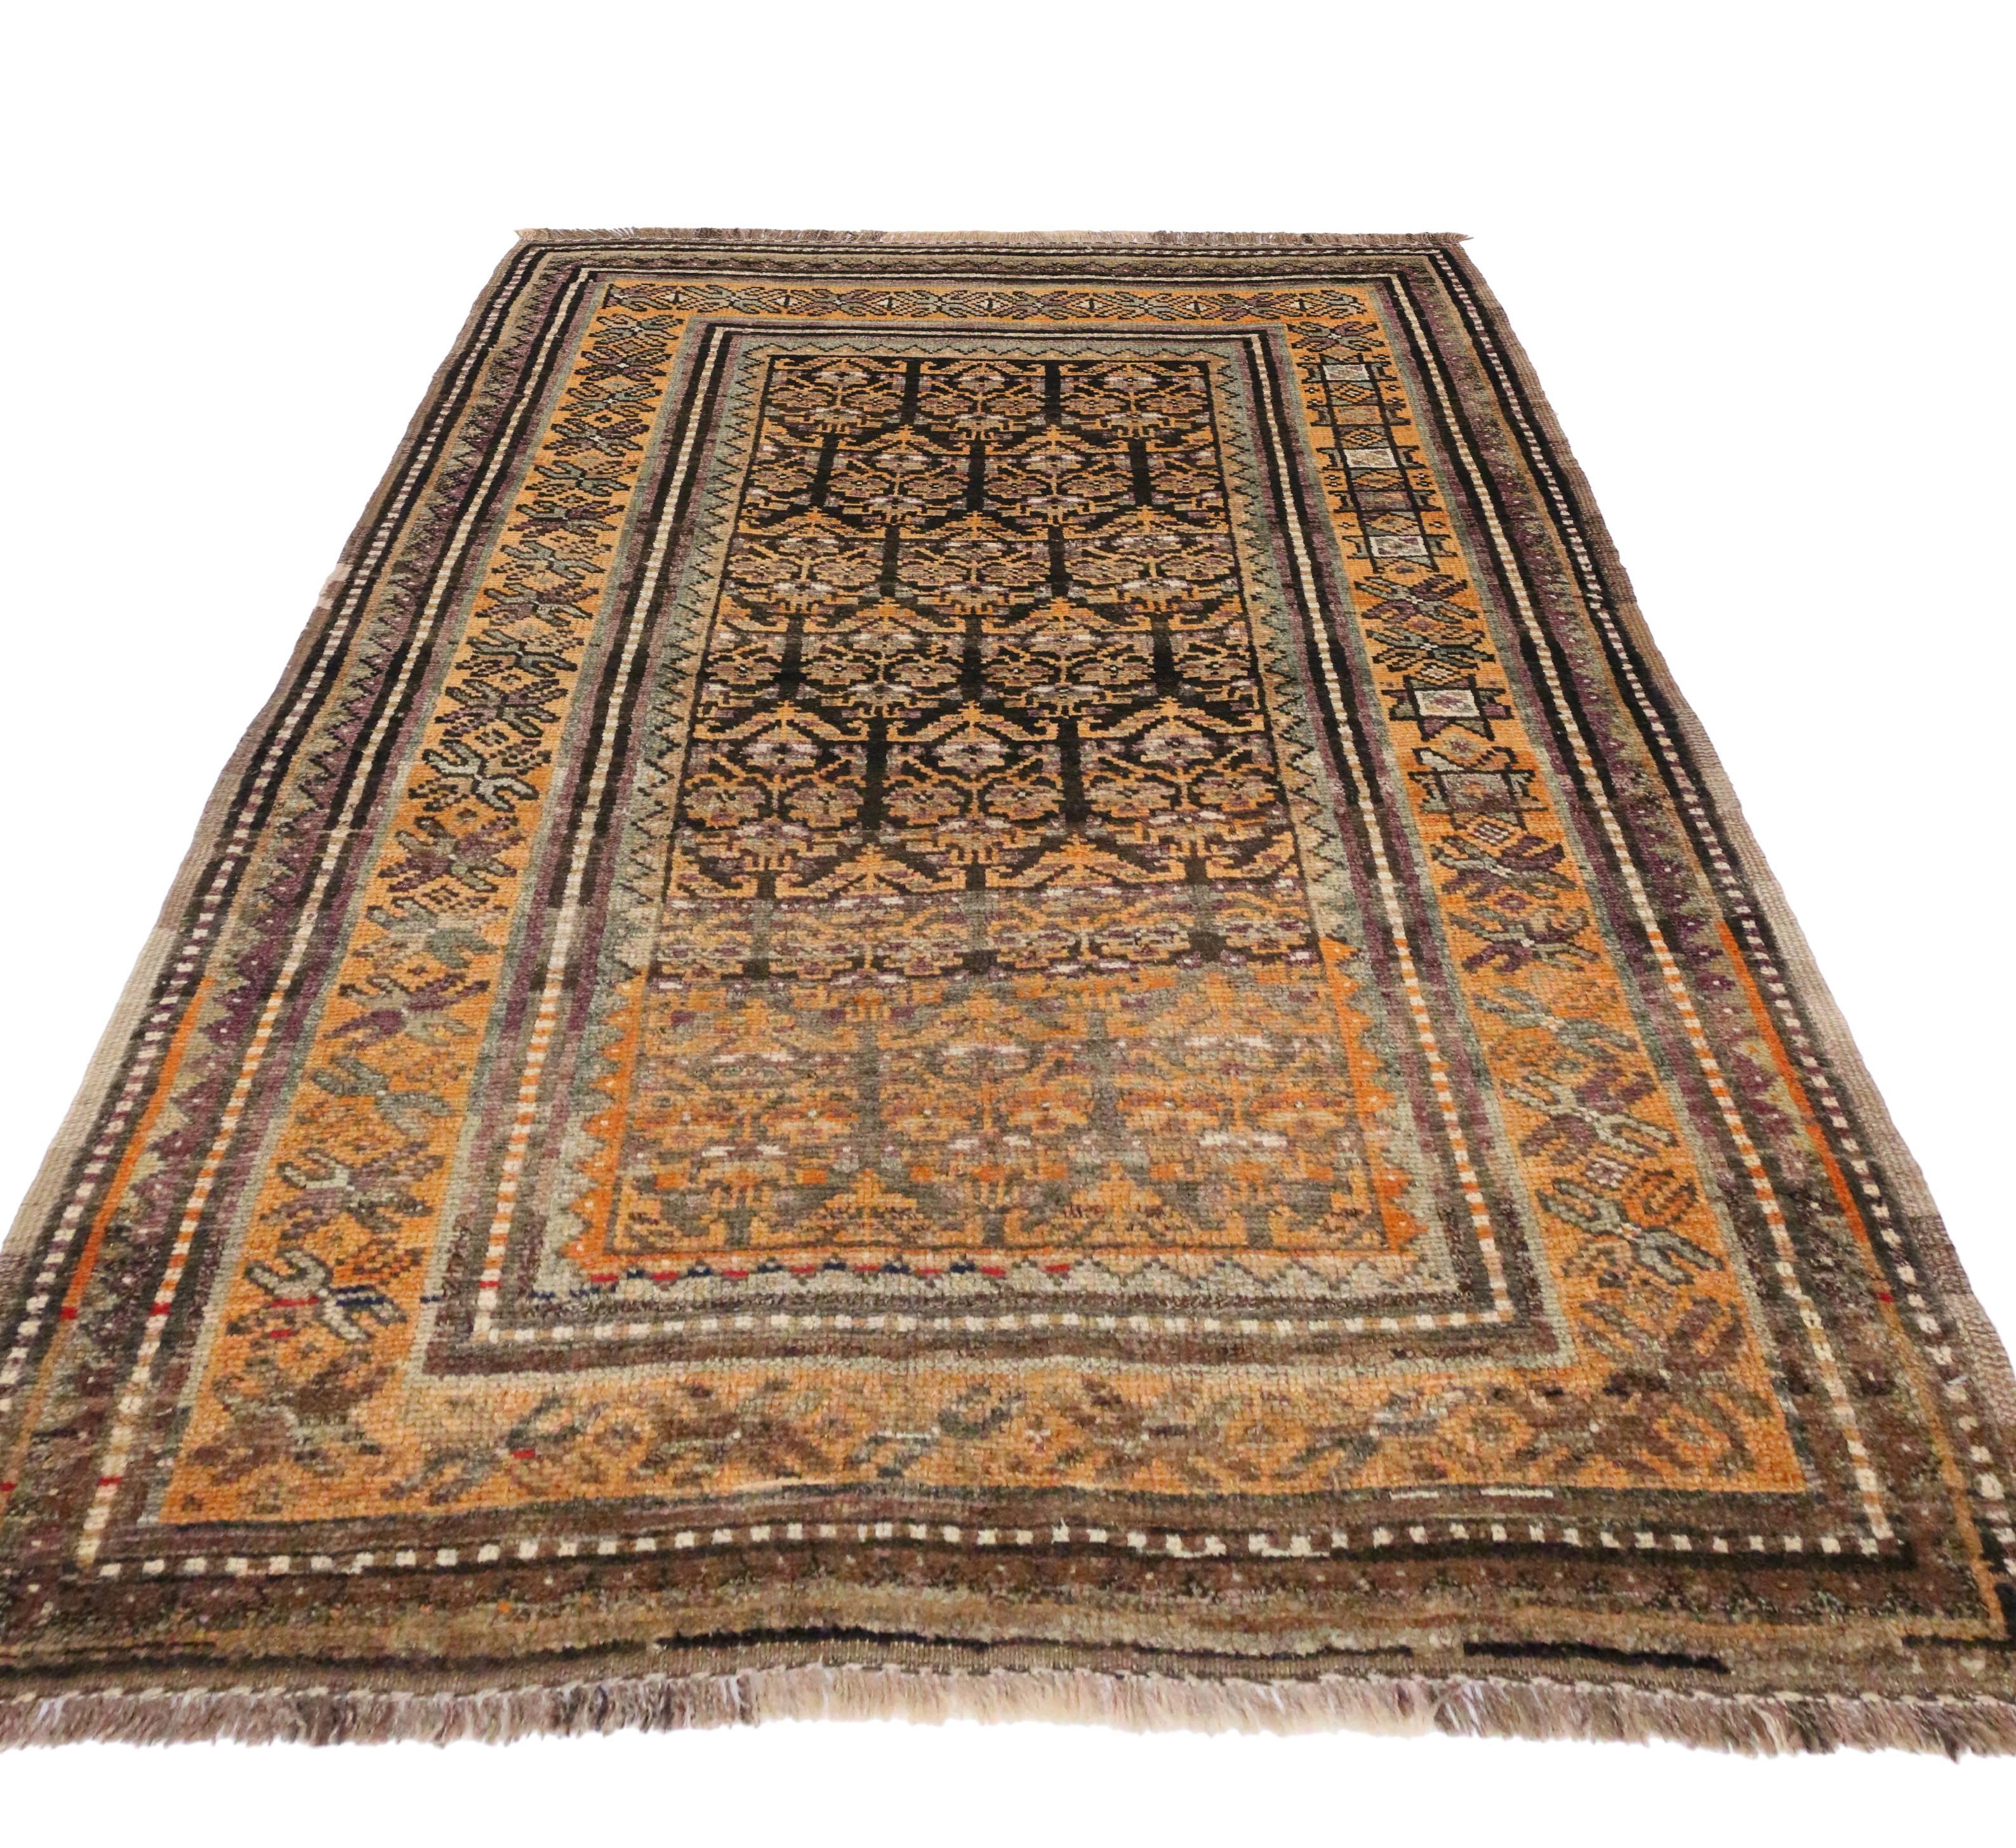 Vintage Shiraz Persian Tribal Rug with Mid-Century Modern Style For Sale 3